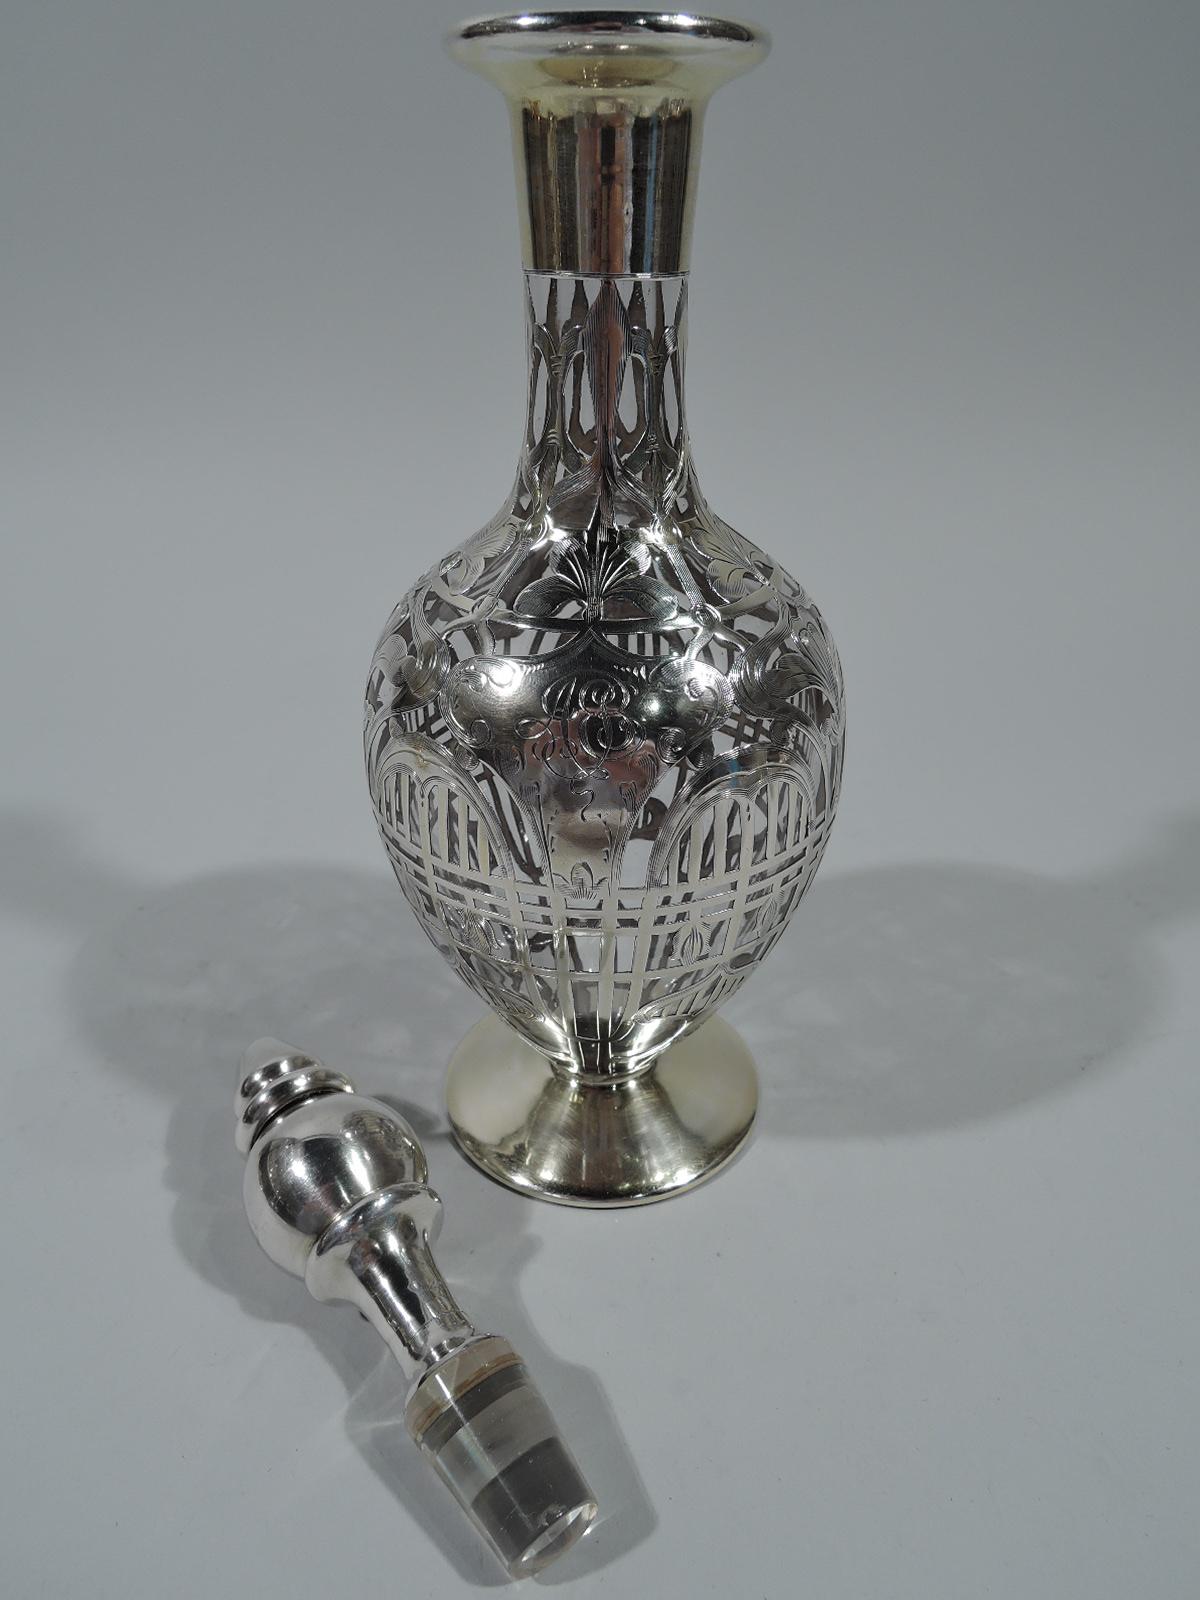 Art Nouveau clear glass decanter with silver overlay. Made by Black, Starr & Frost in New York, circa 1920. Oval bowl with flat foot, cylindrical neck, and everted rim. Ball stopper with conical mount, spool neck, and short plug. Dense ornament with